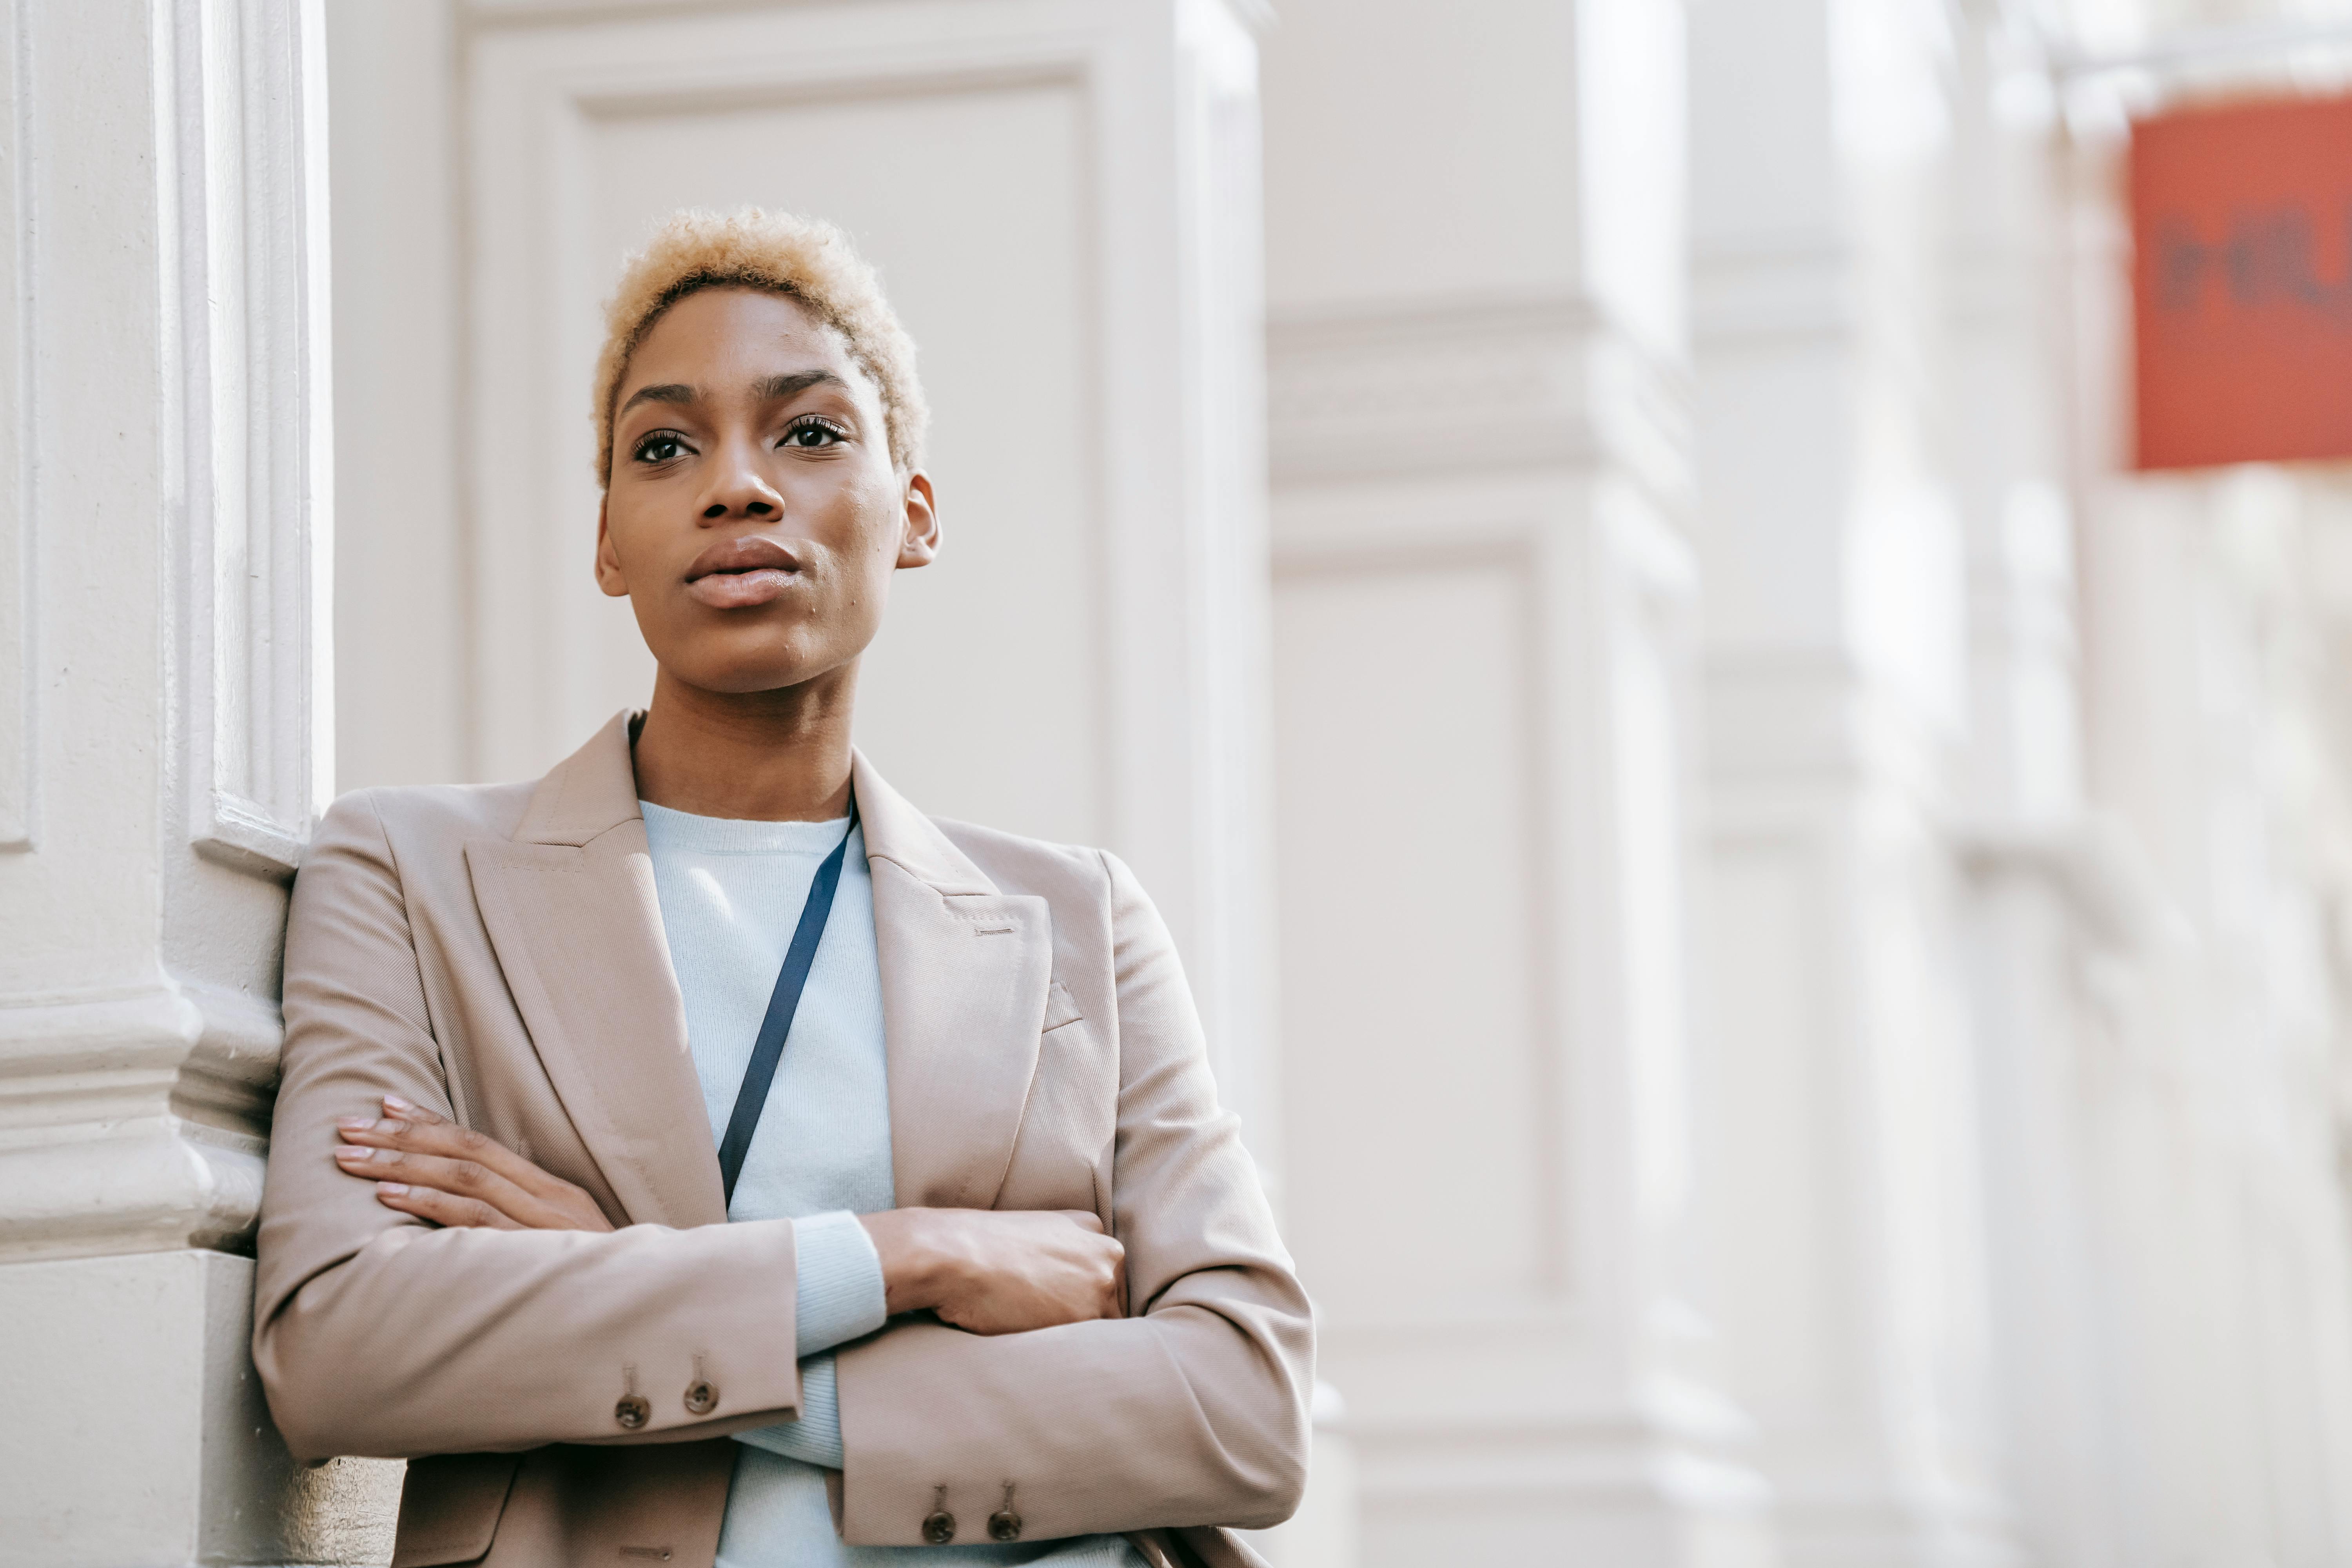 A neutral-looking woman with her arms folded | Source: Pexels